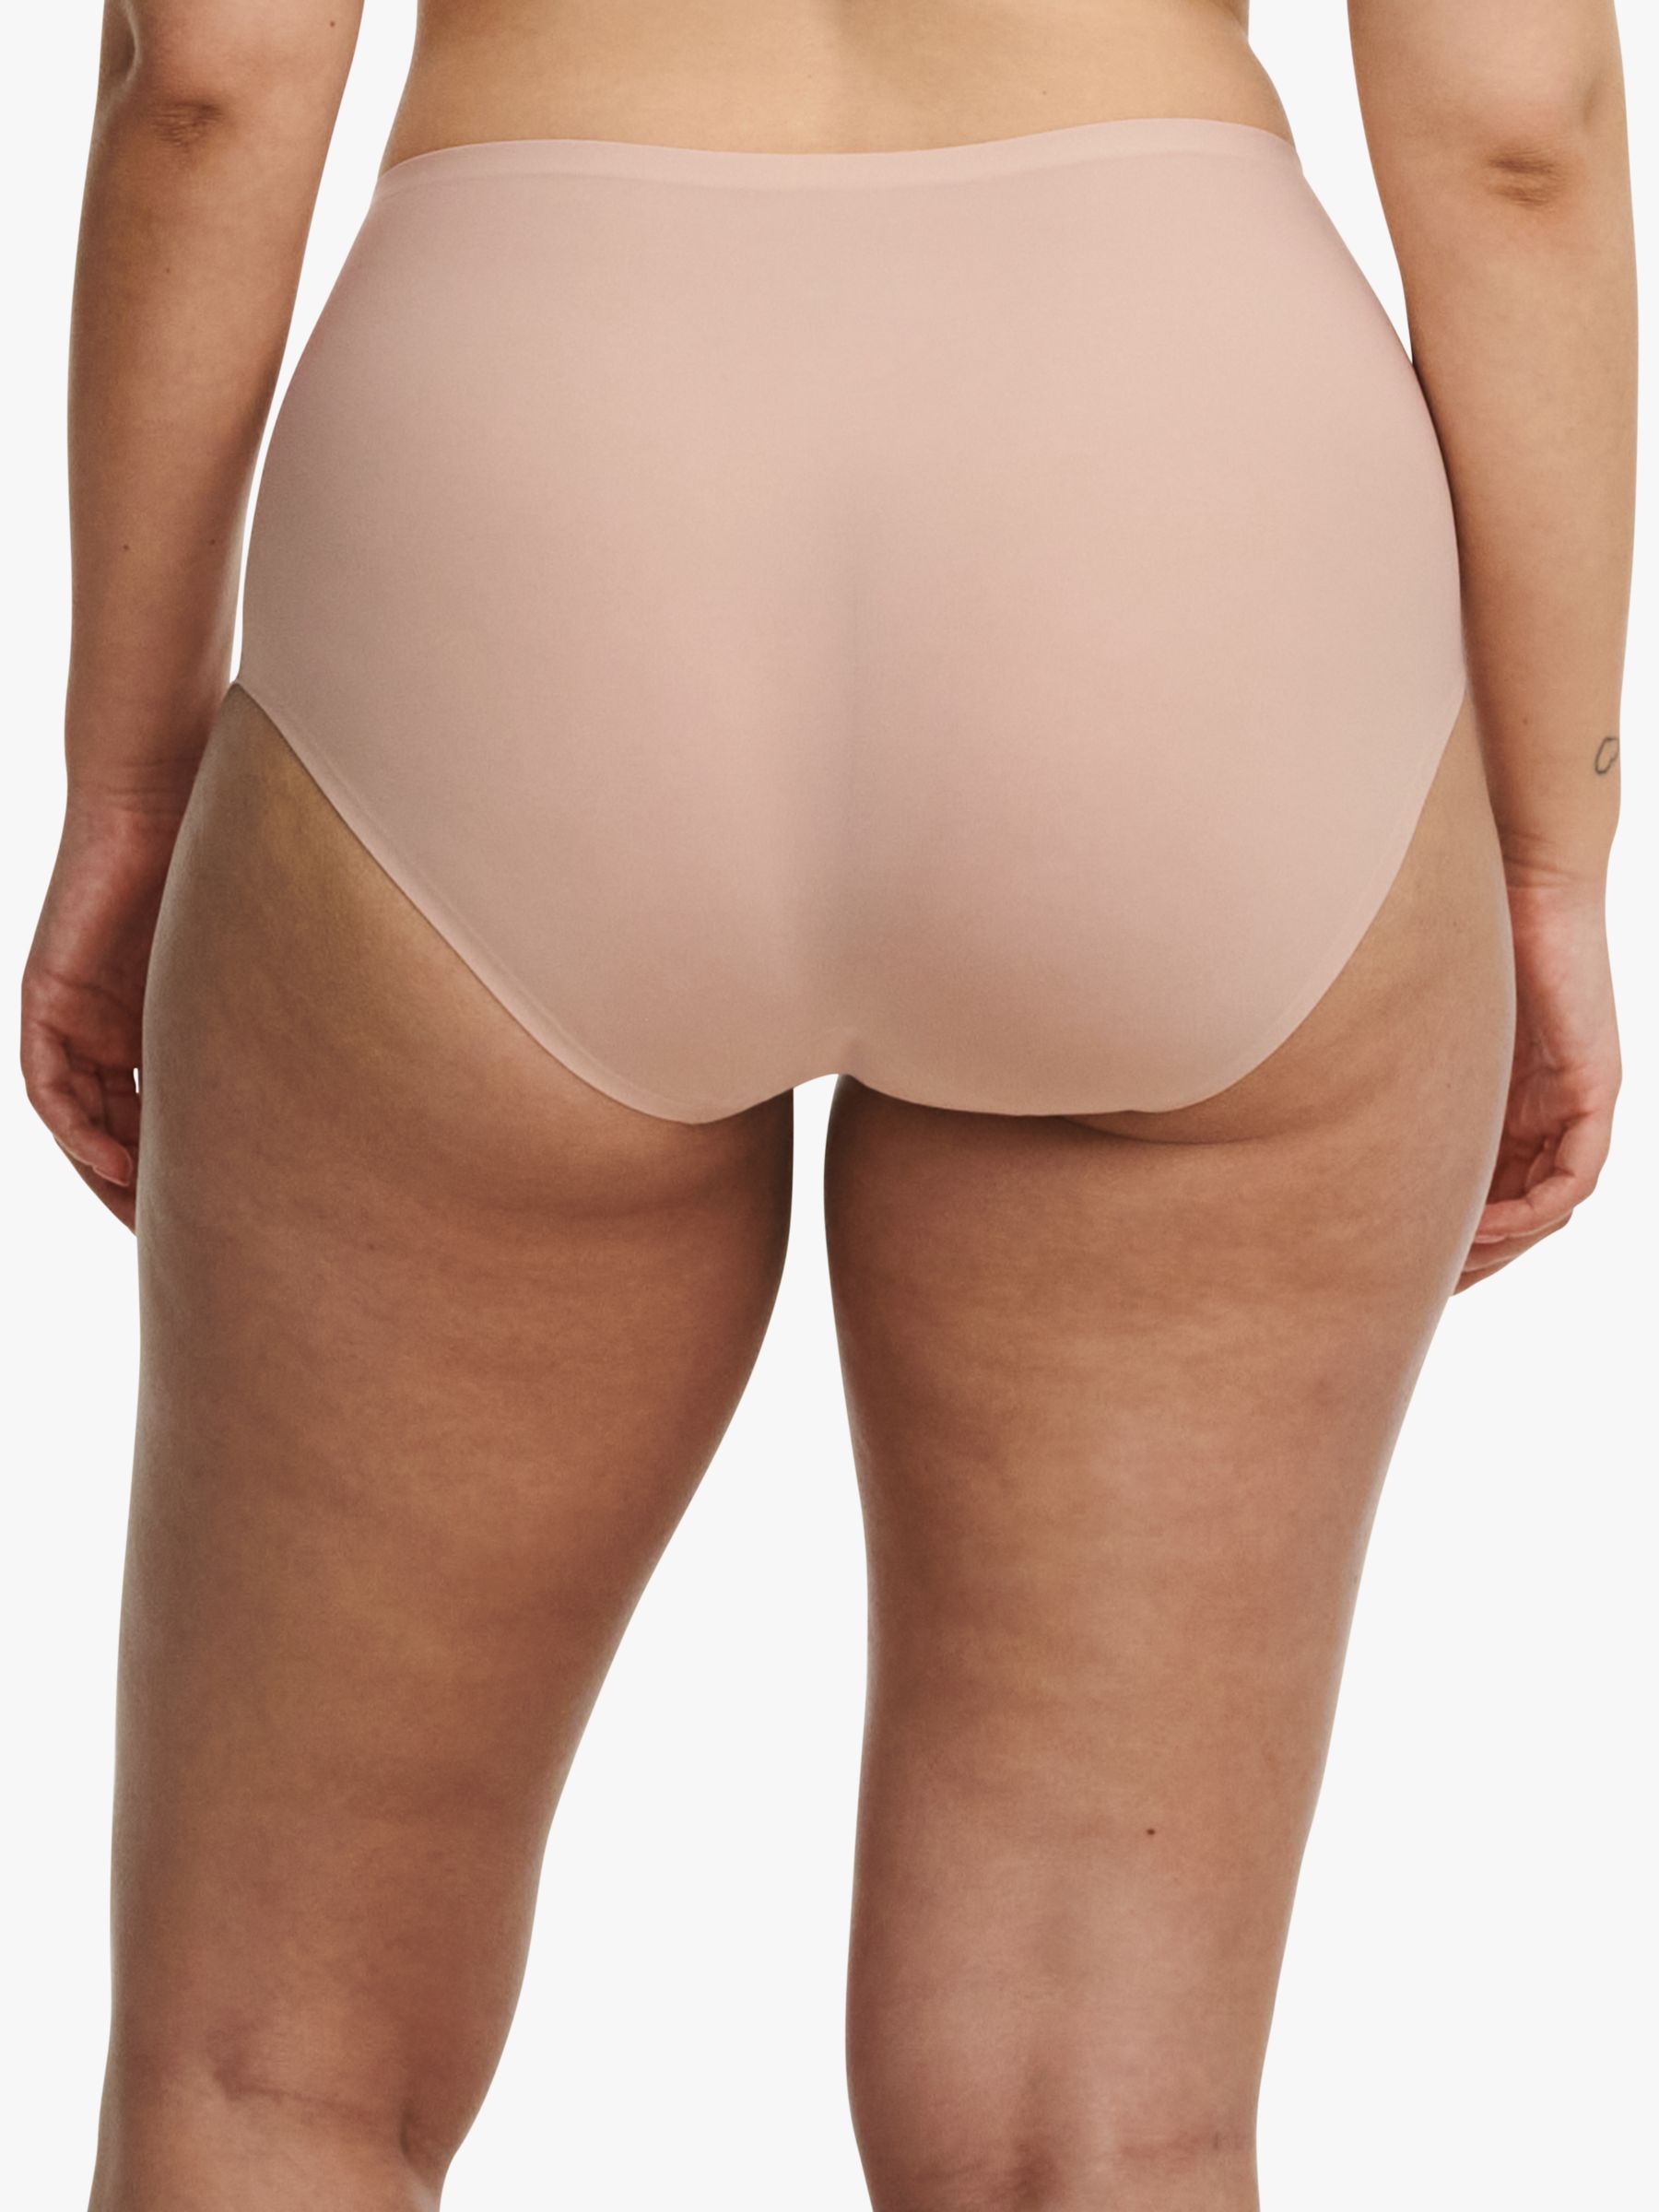 Chantelle Soft Stretch High Waisted Knickers, Dusky Pink, One Size